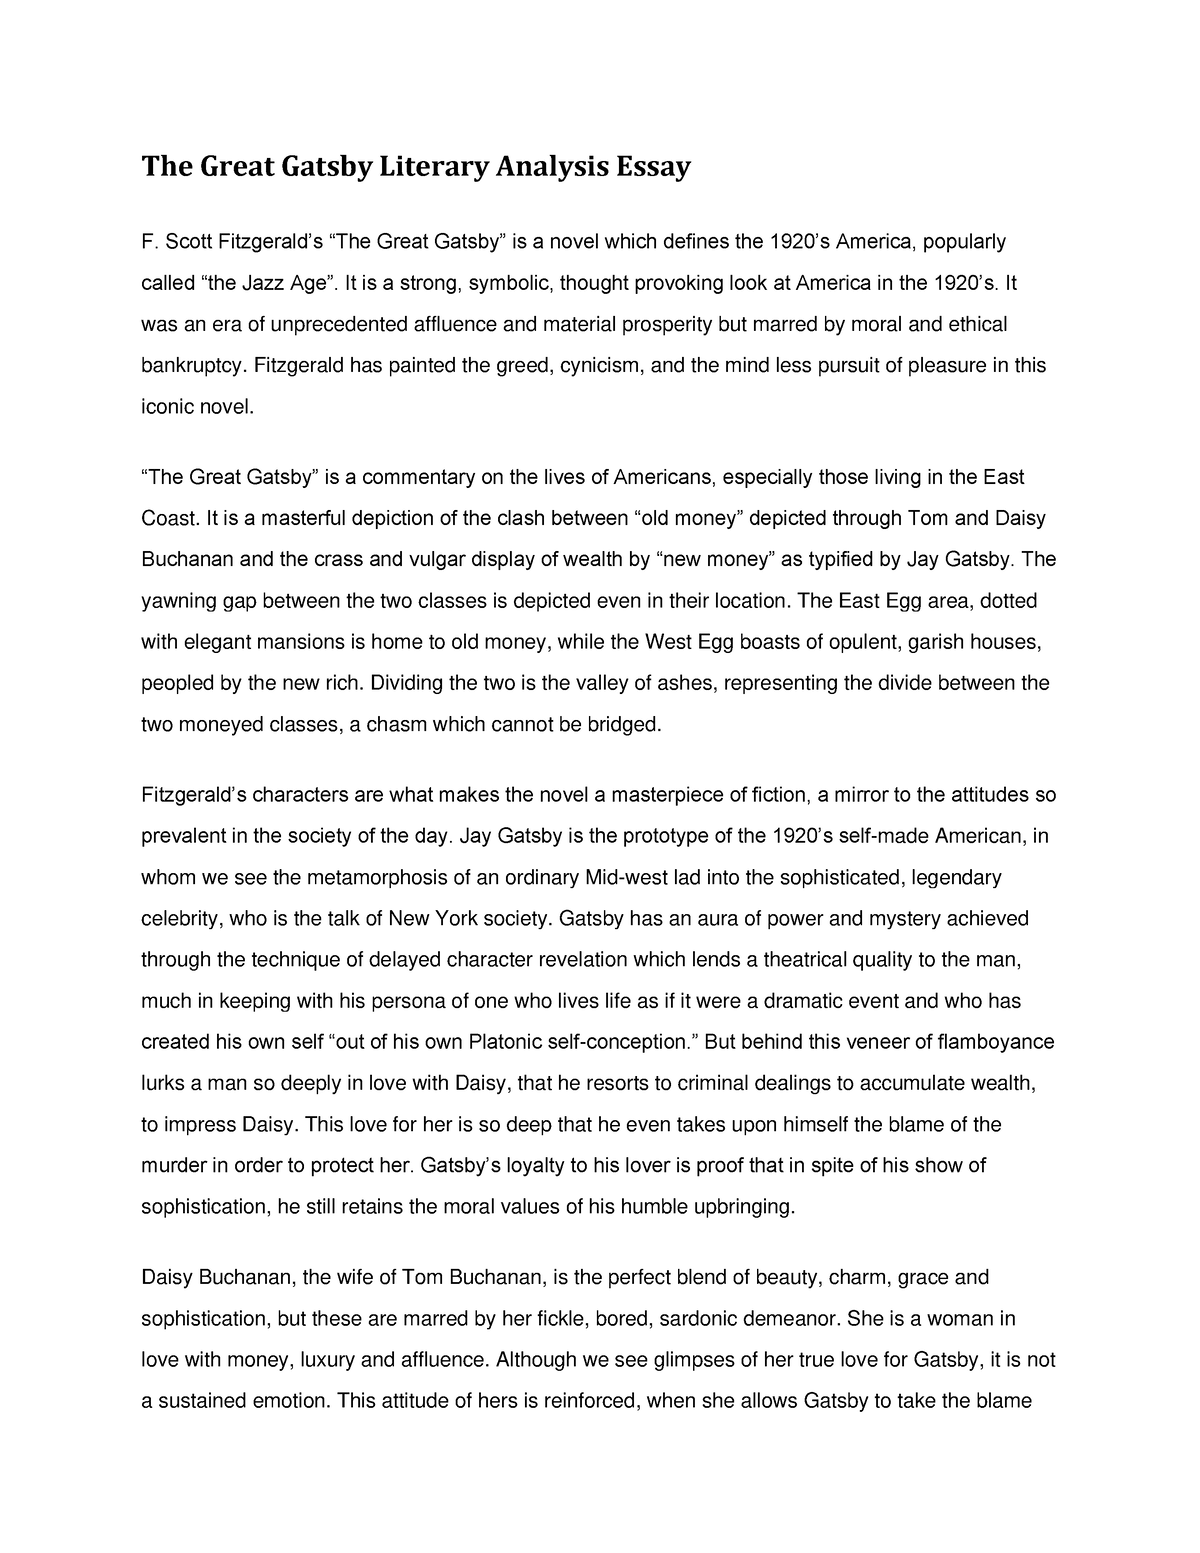 5 paragraph essay on the great gatsby